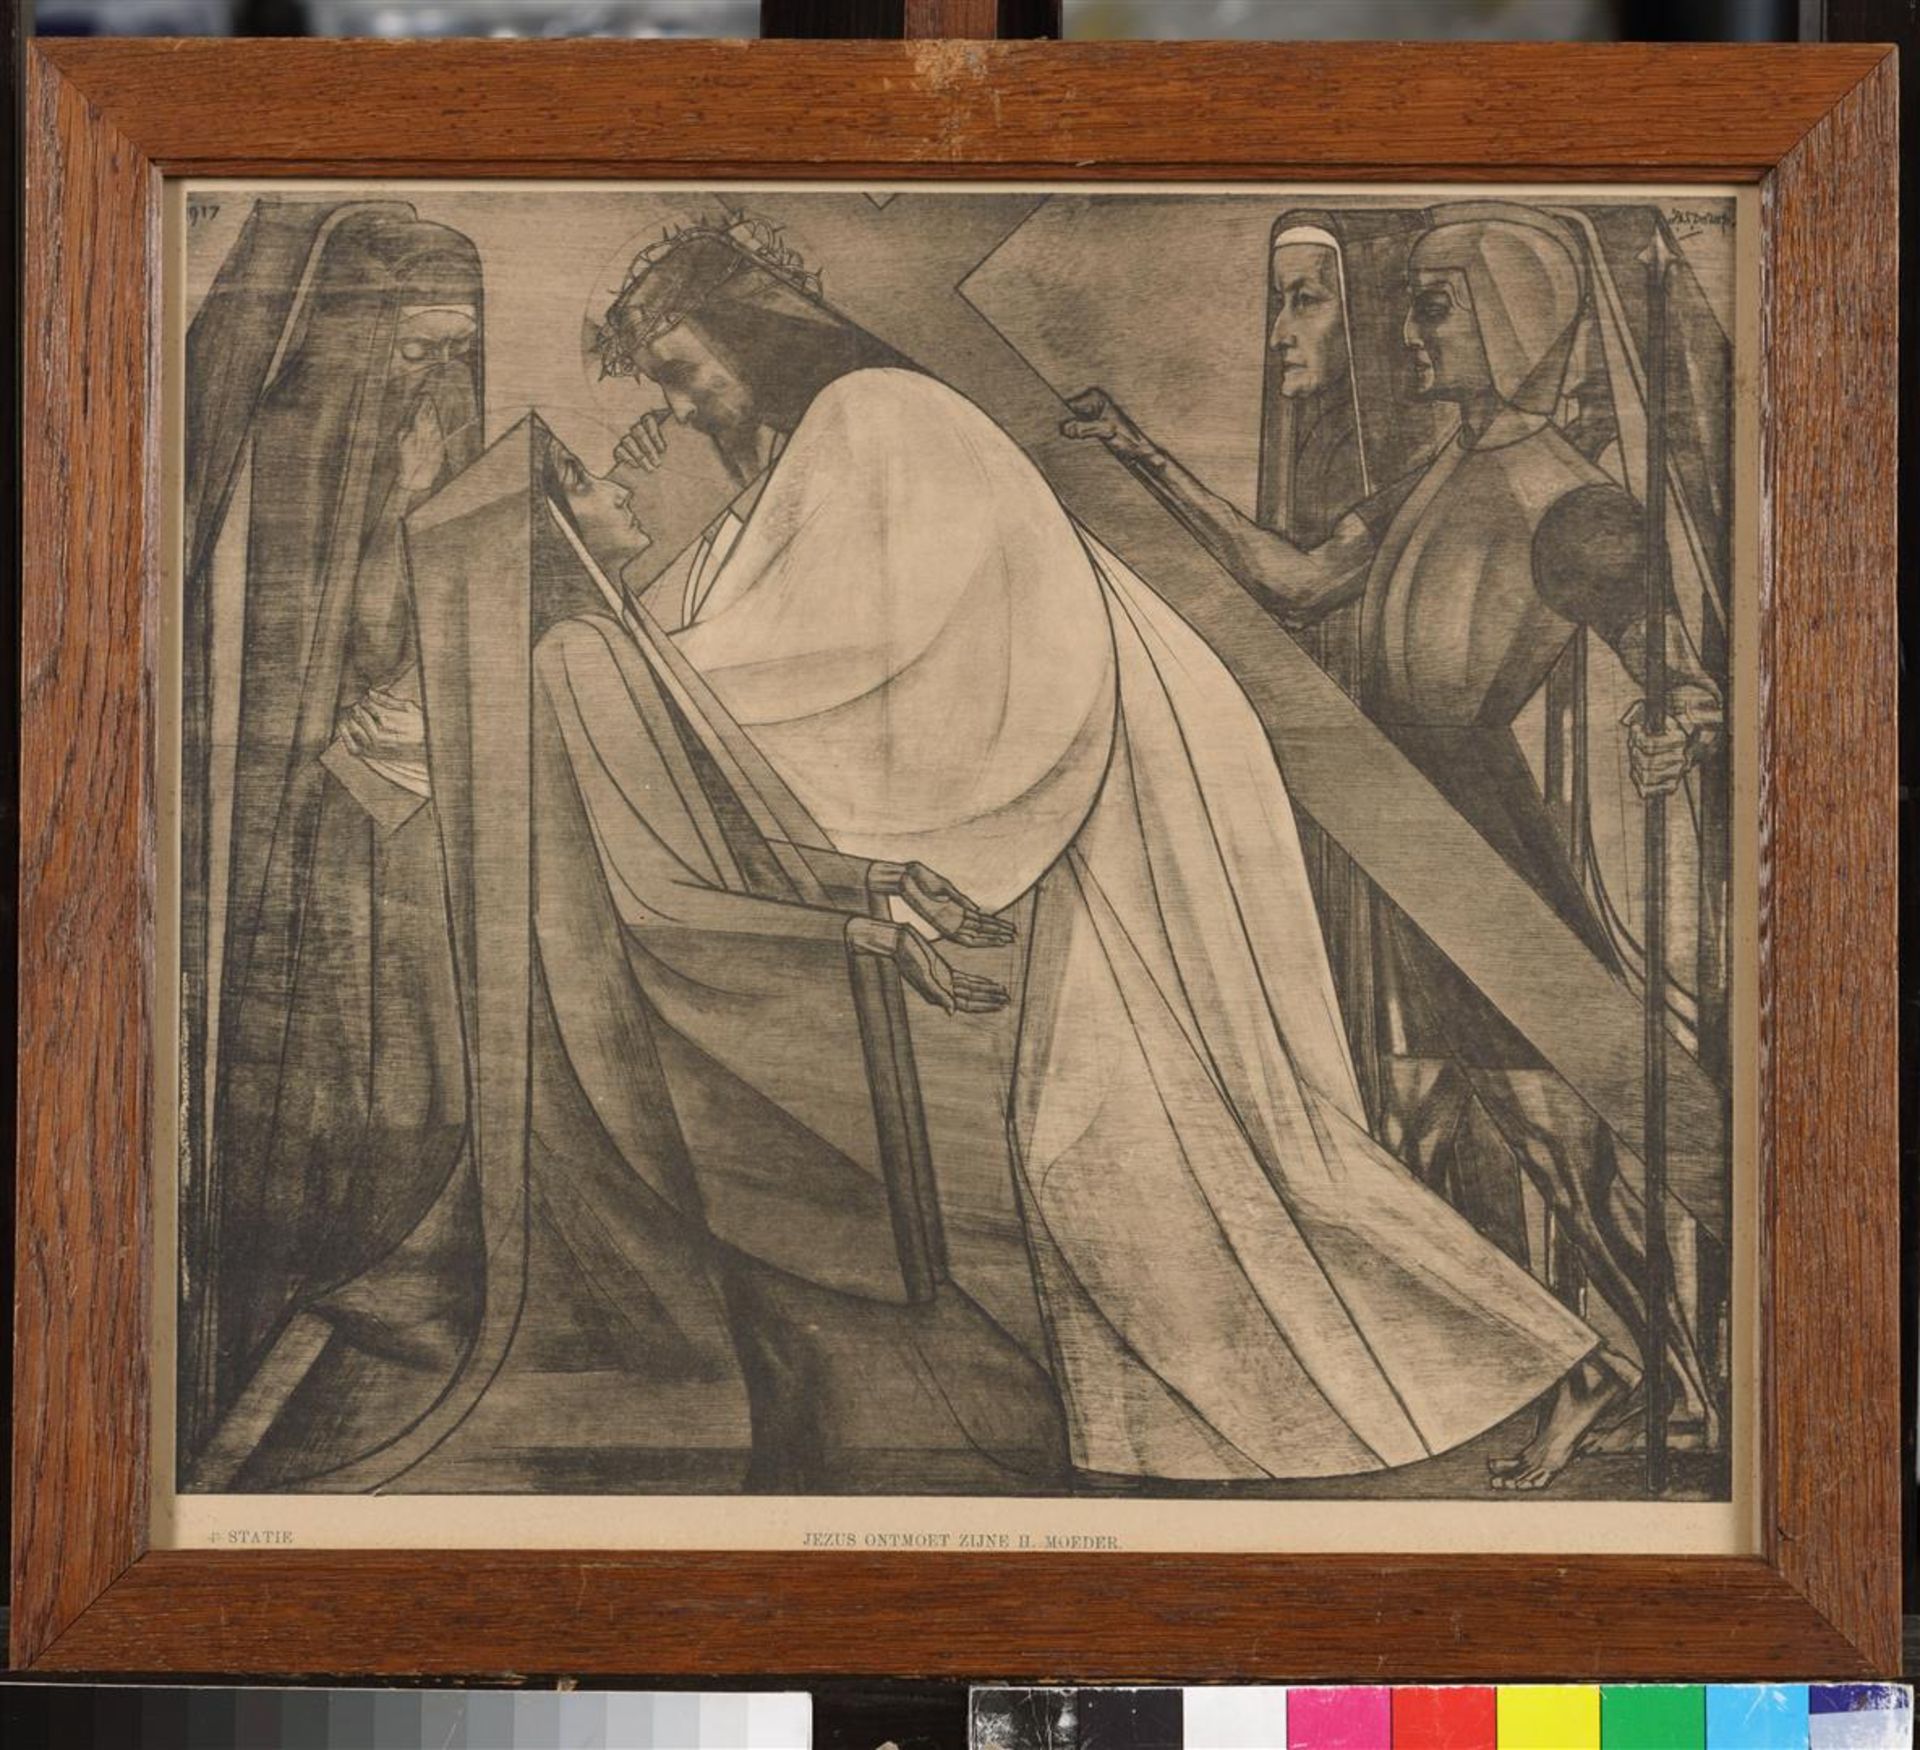 Thirteen lithographs of the Way of the Cross by Jan Toorop 